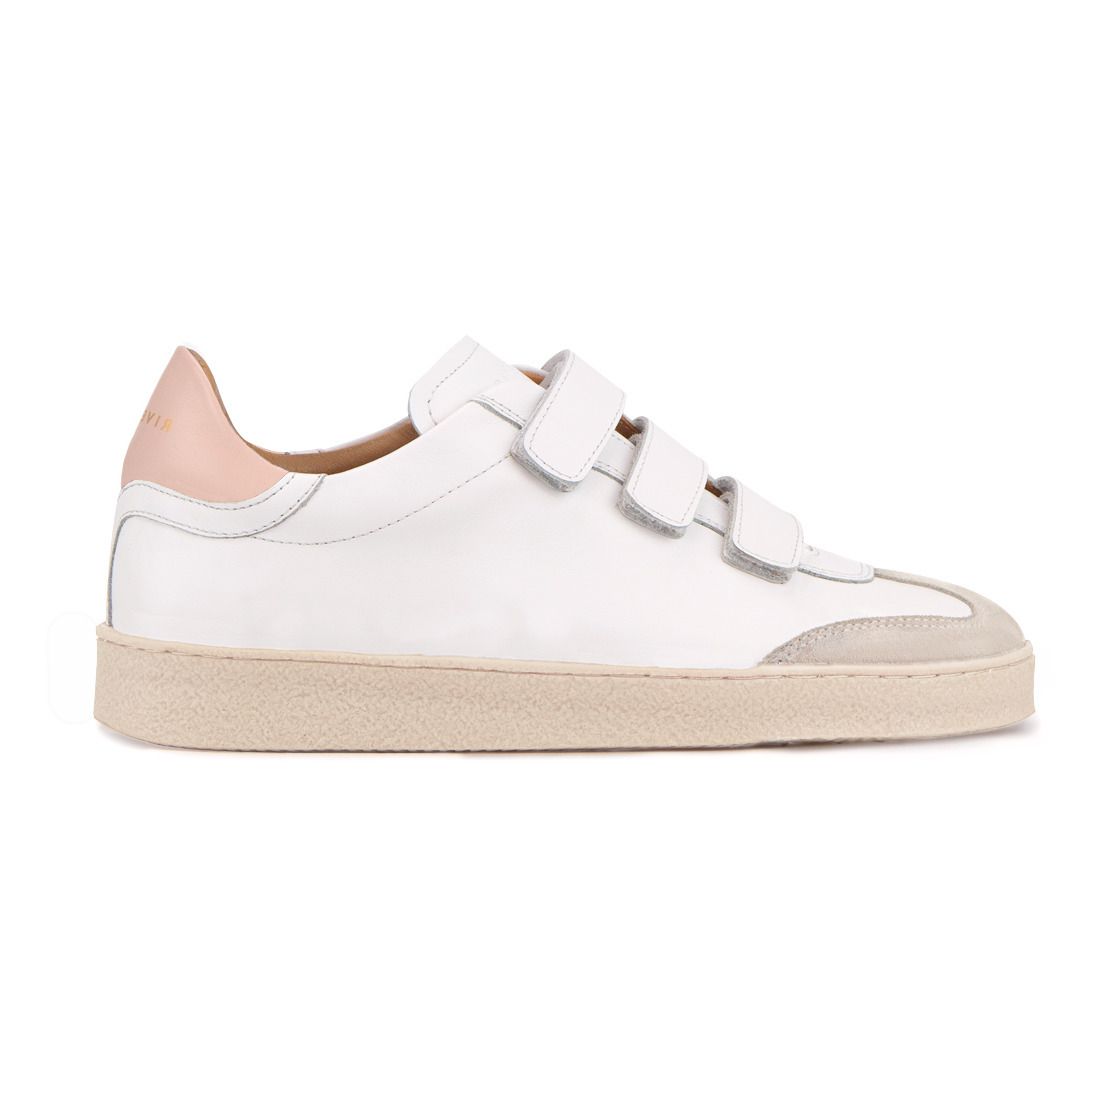 N°11 Bi-material Sneakers White Rivecour Shoes Adult